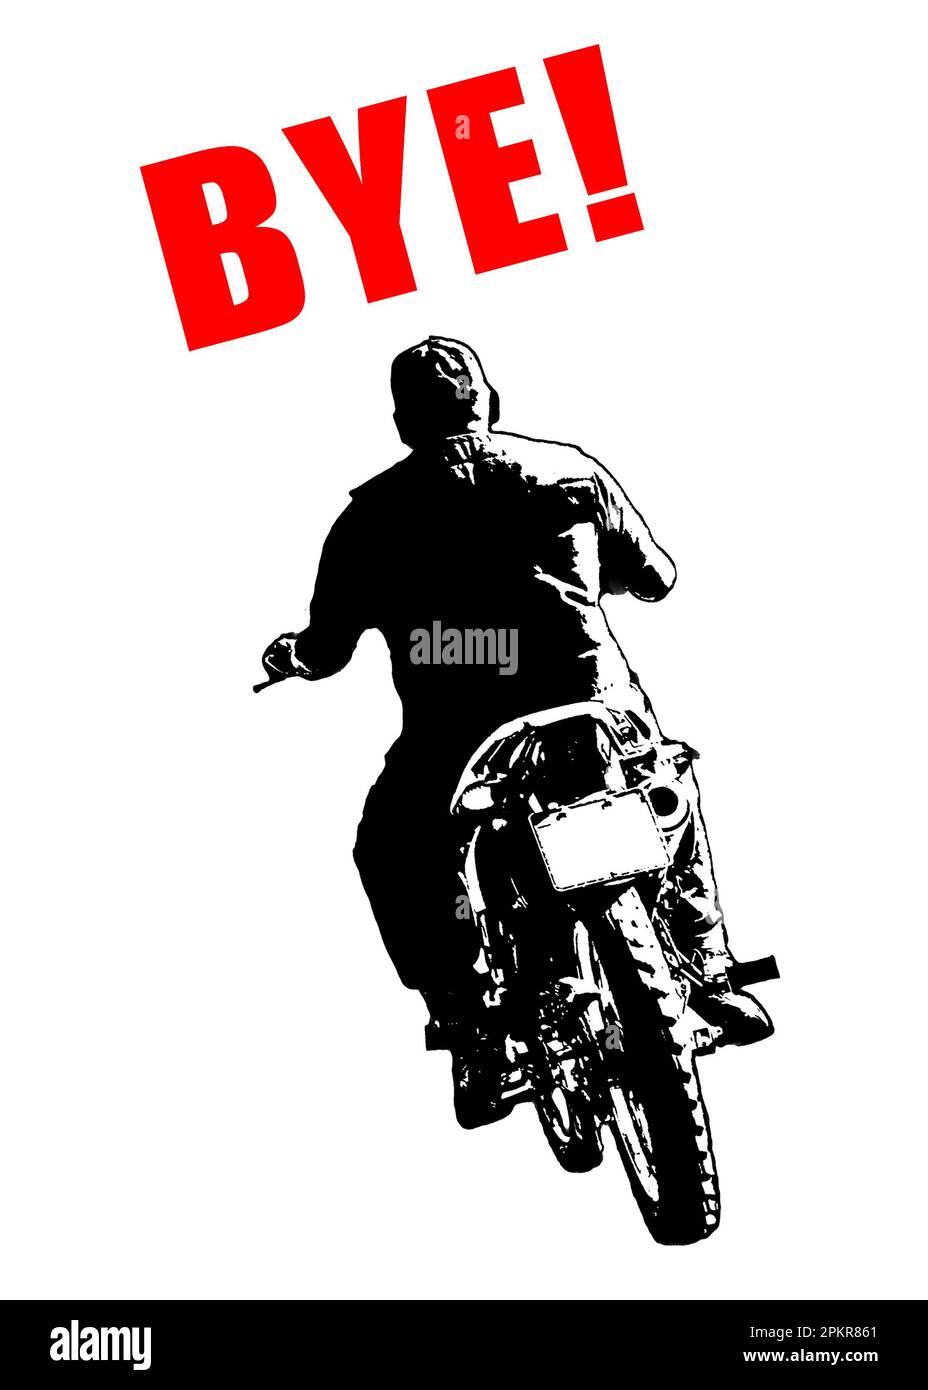 https://c8.alamy.com/comp/2PKR861/bye-funny-concept-art-stencil-style-graphic-sticker-isolated-illustration-2PKR861.jpg